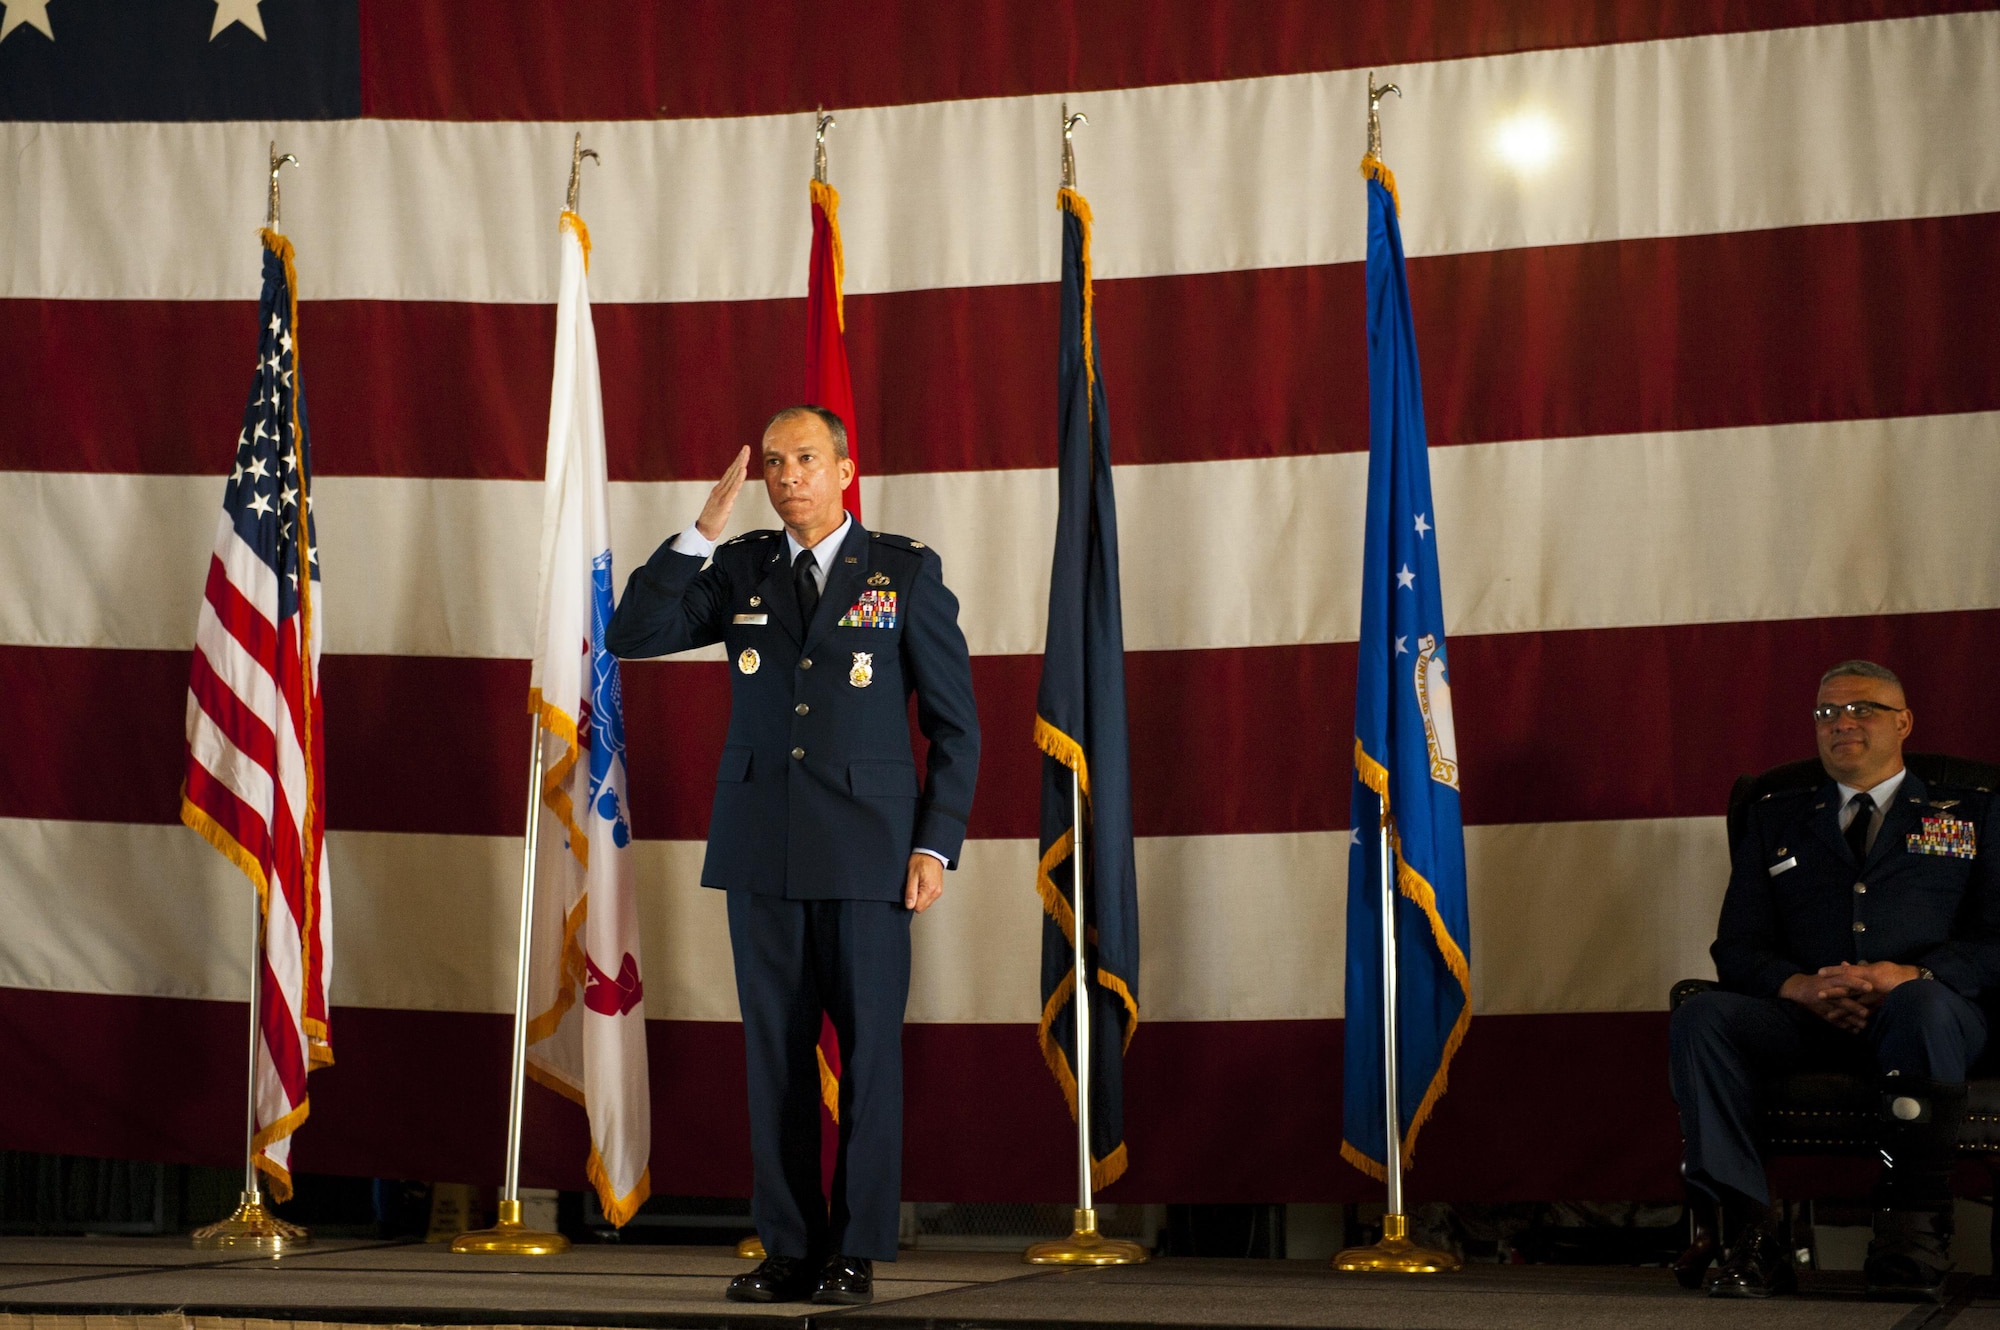 U.S. Air Force Lt. Col. Scott D. Cline, 312th Training Squadron Commander, salutes the 312th TRS for the first time during the 312th TRS change of command at the Louis F. Garland Department of Defense Fire Academy High Bay Fire Academy high bay on Goodfellow Air Force Base, Texas, July 10, 2017. The change of command ceremony is a time honored military tradition that signifies the orderly transfer of authority. (U.S. Air Force photo by Senior Airman Scott Jackson/Released)